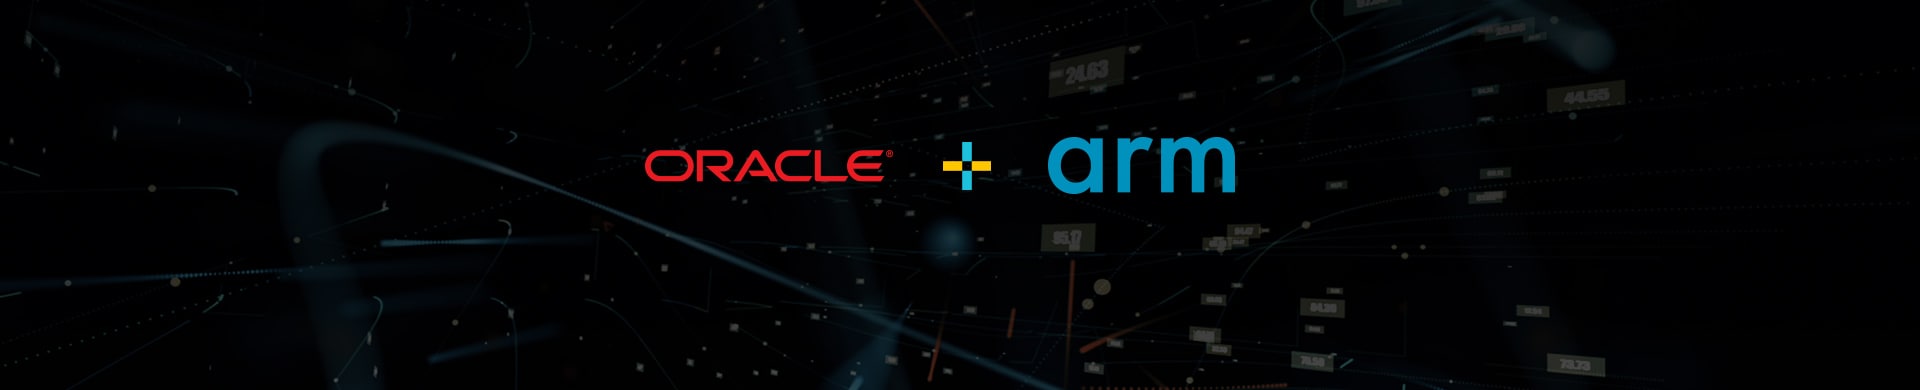 Oracle and Arm